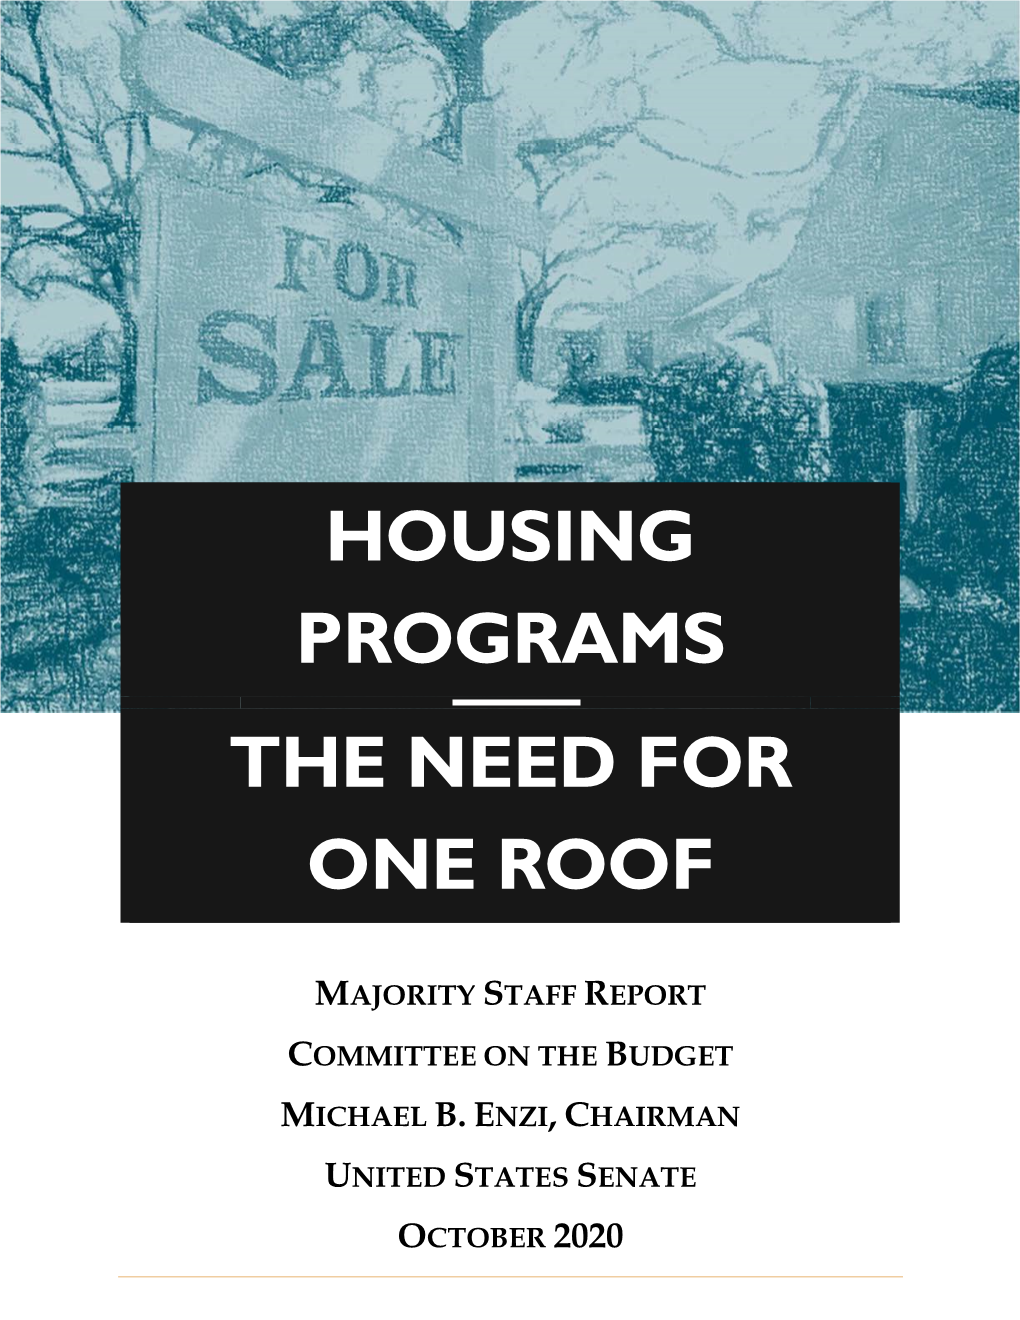 Housing Programs: the Need for One Roof (Majority Staff Report)